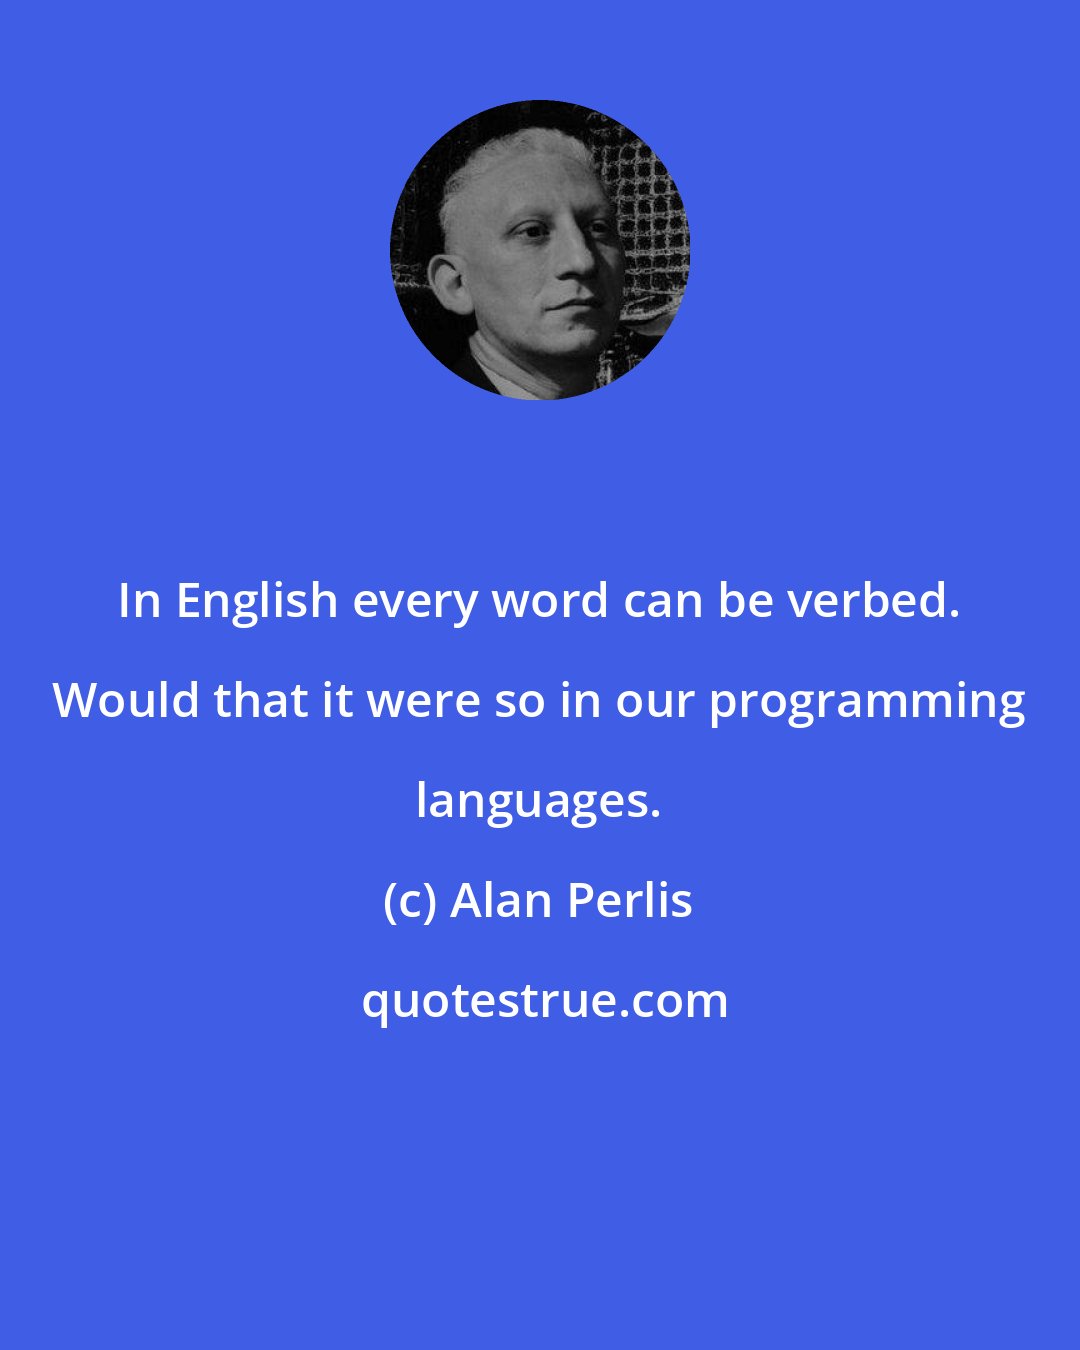 Alan Perlis: In English every word can be verbed. Would that it were so in our programming languages.